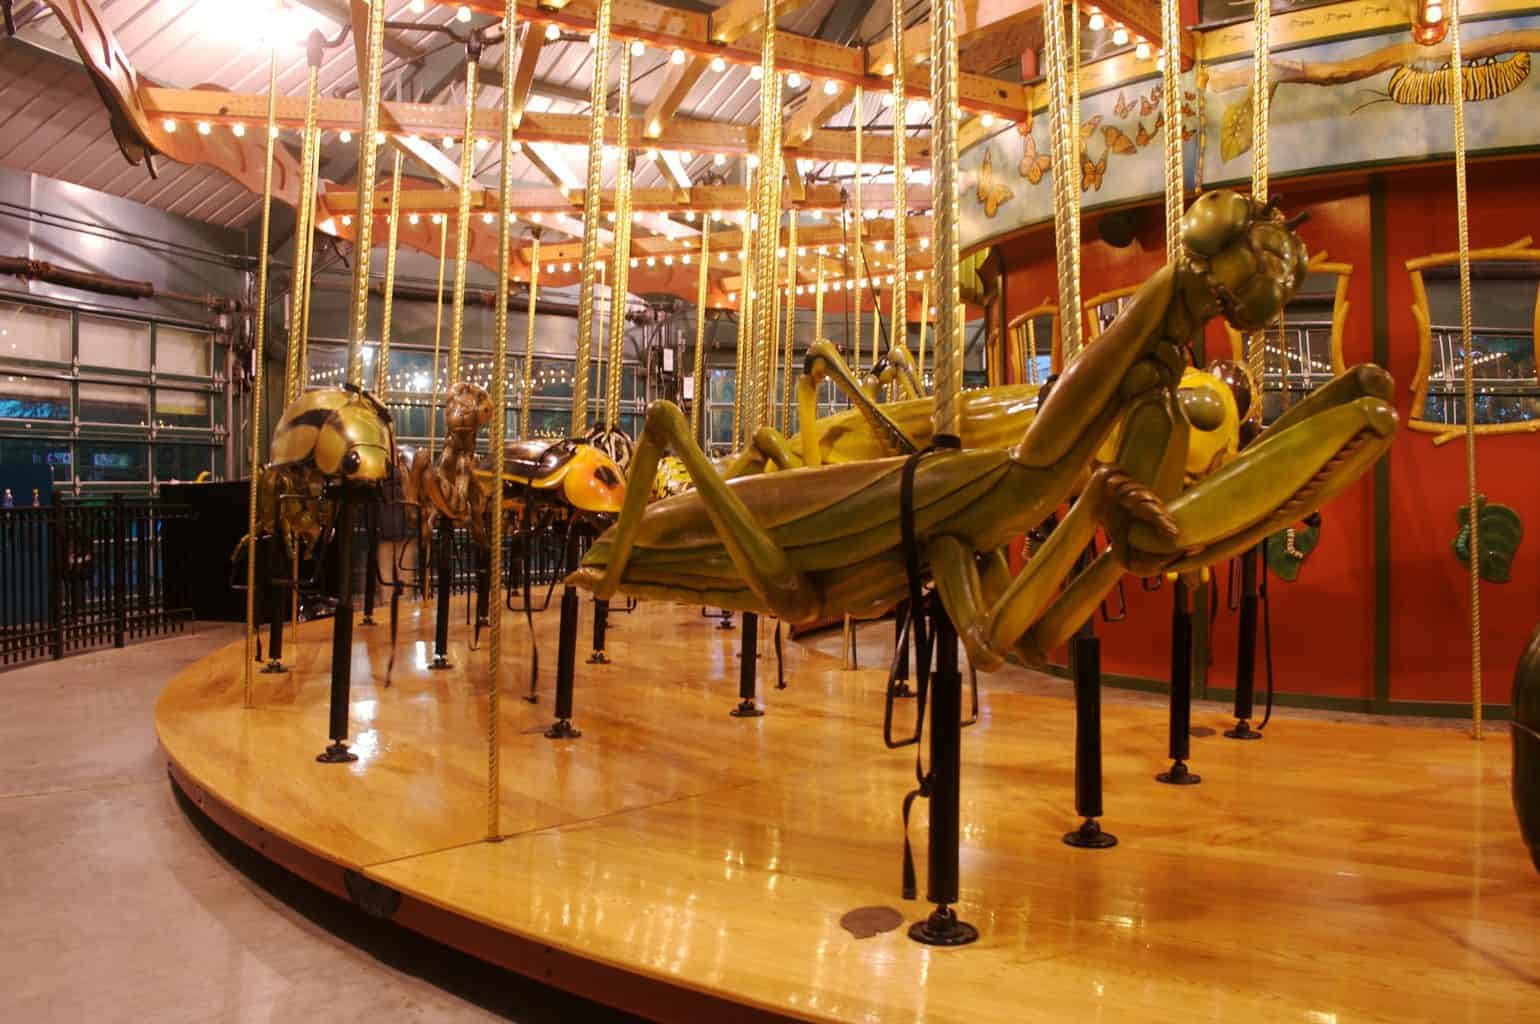 Hop on Bronx Zoo's signature bug carousel and enjoy one of the most unusual things to do in NYC.